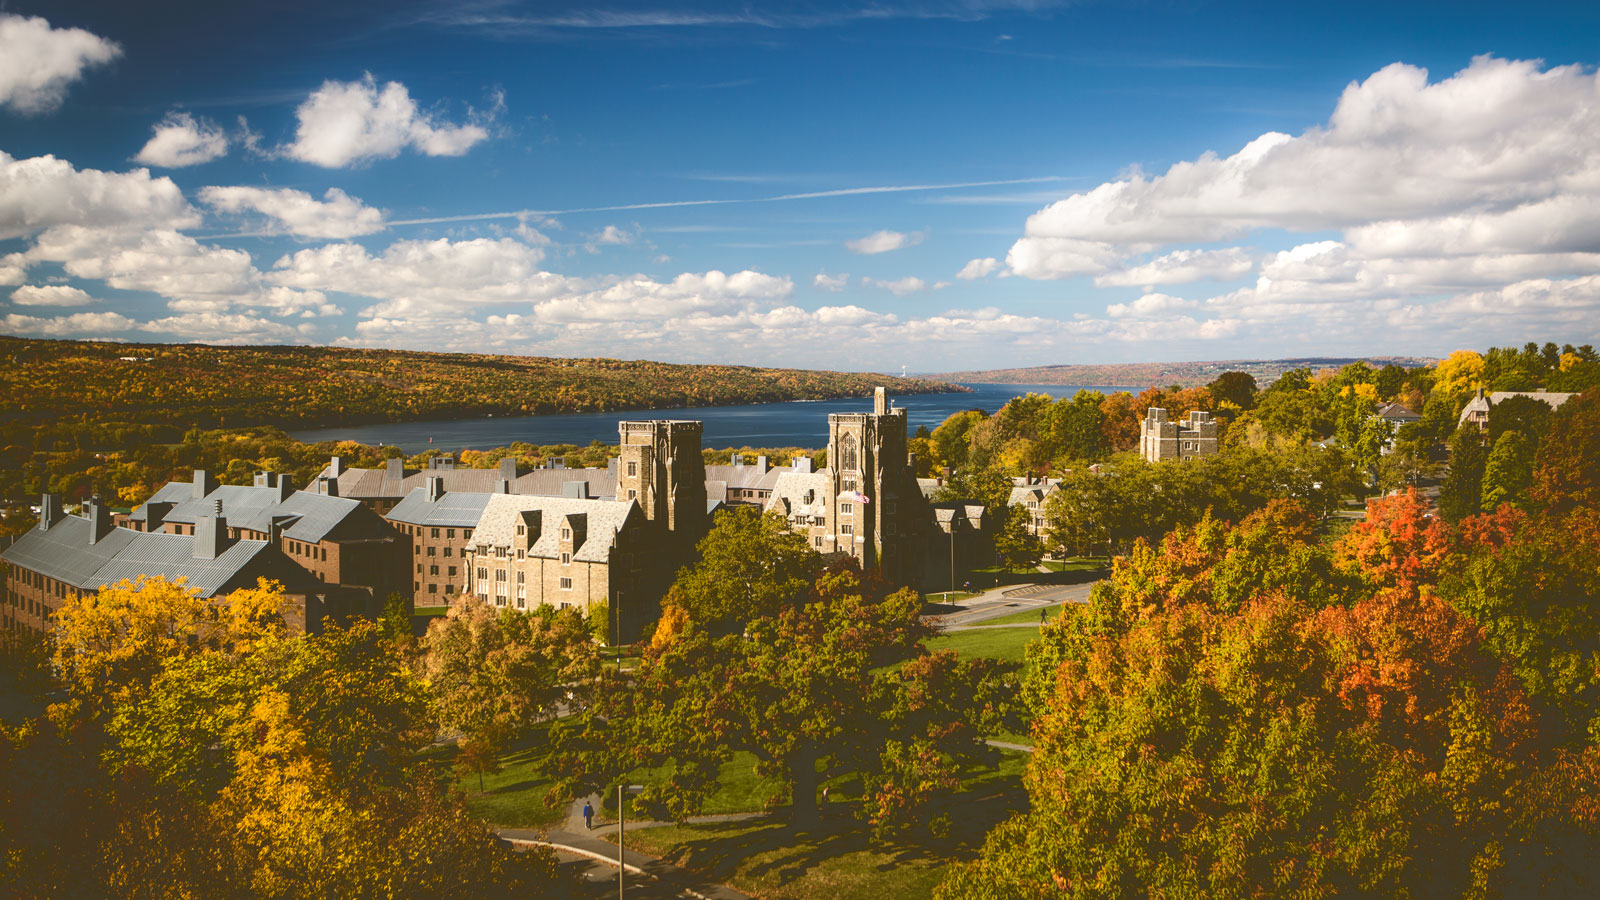 West campus in fall, with Cayuga Lake in the background.